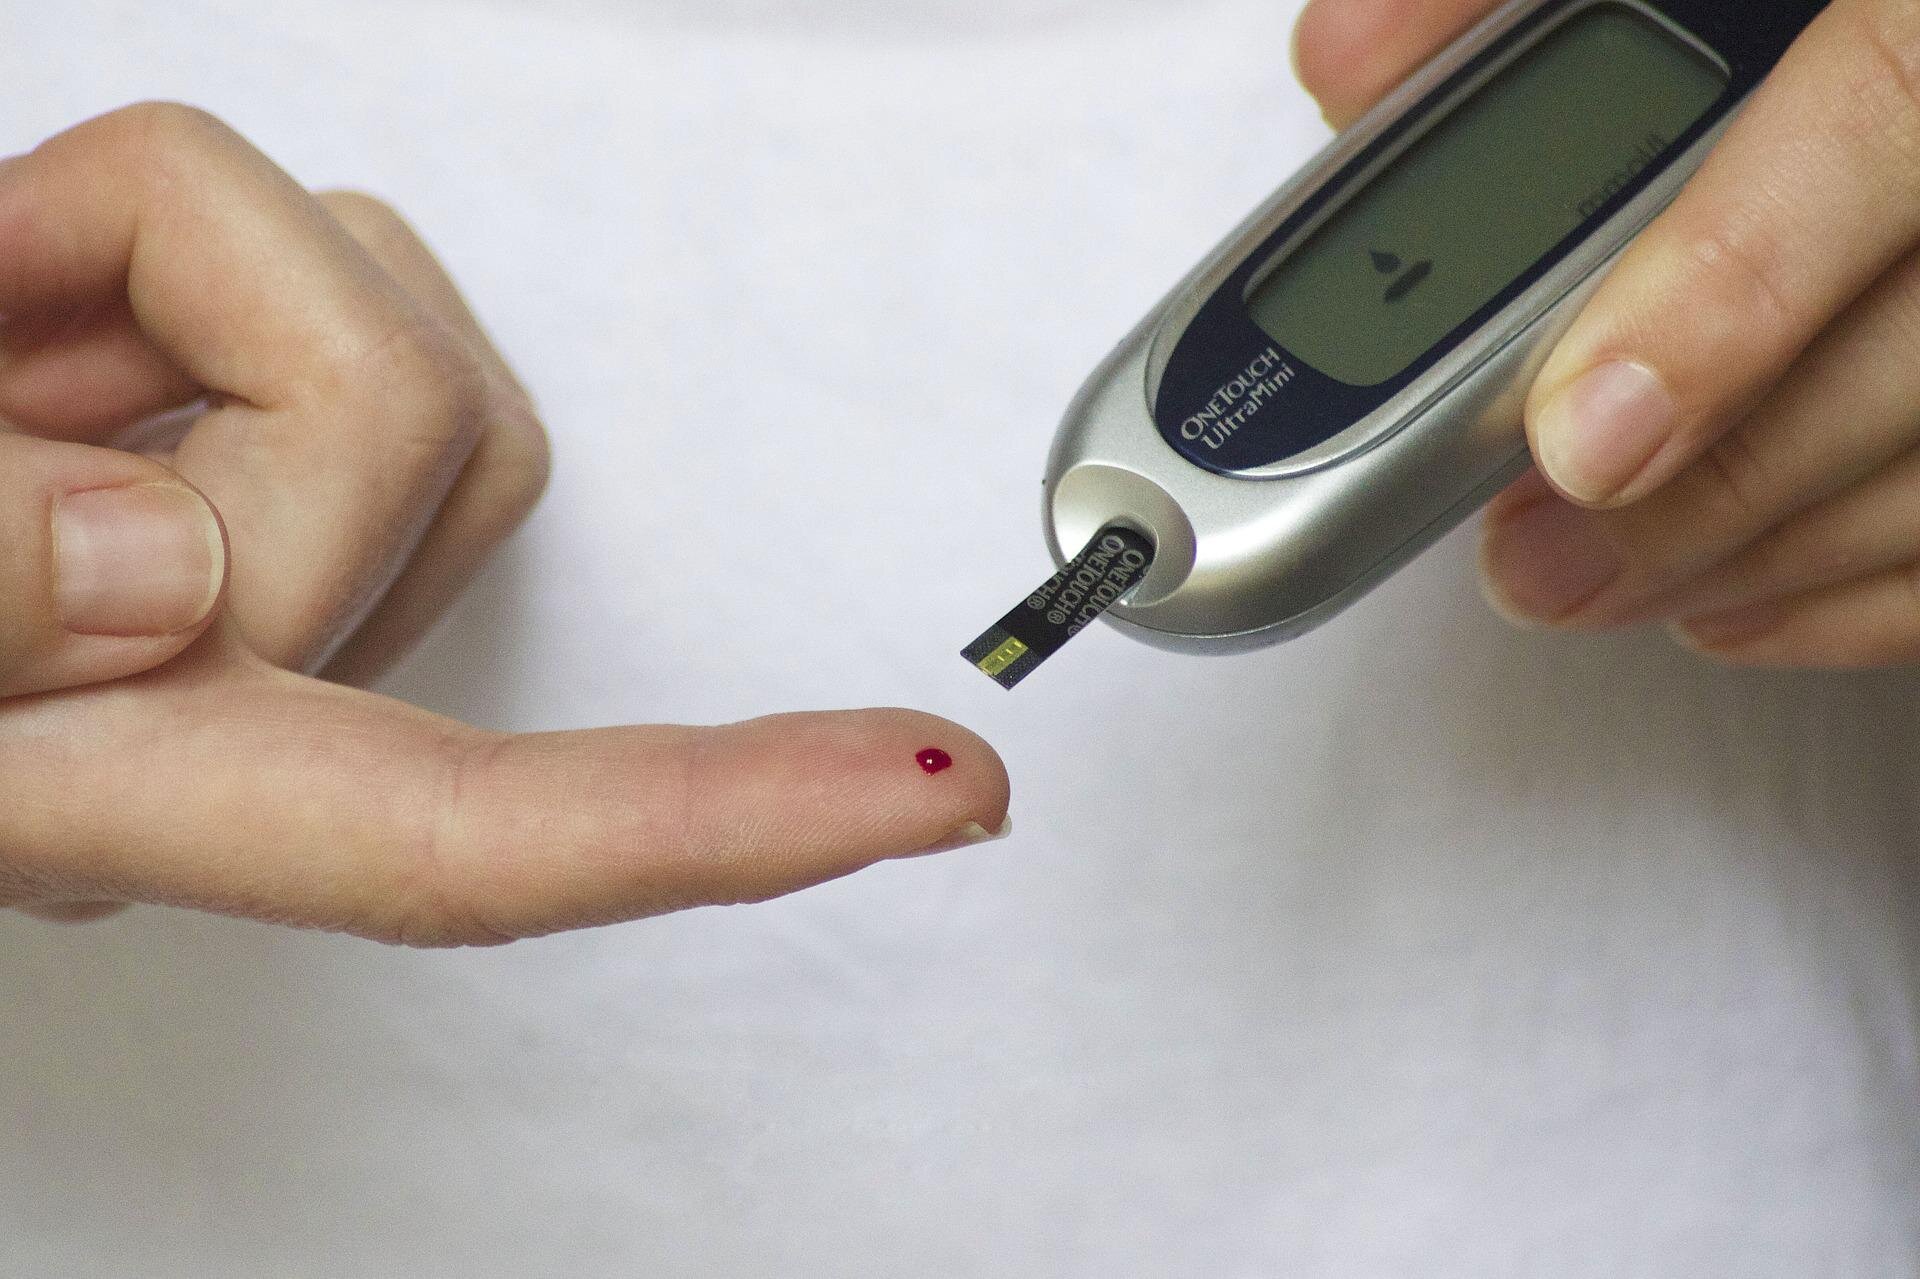 Study shows young adults don’t easily transition to self-care of diabetes